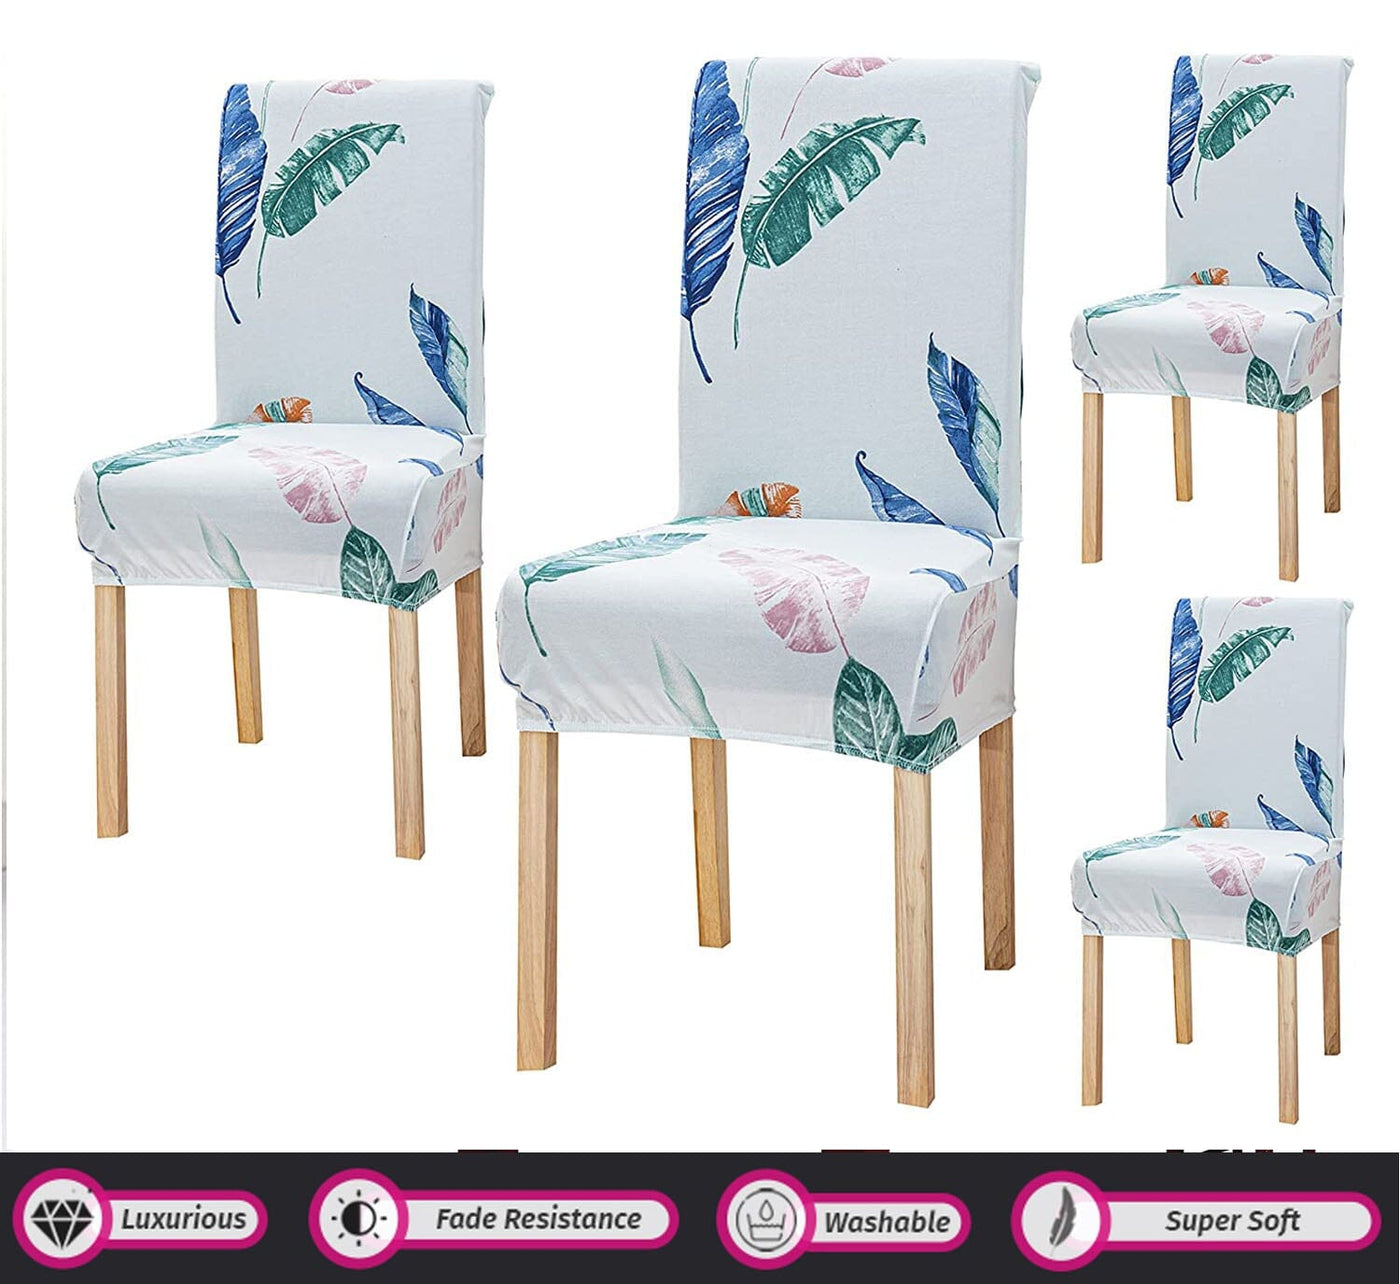 Light Blue Tropical Premium Chair Cover - Stretchable & Elastic Fitted Great Happy IN 2 PCS - ₹799 